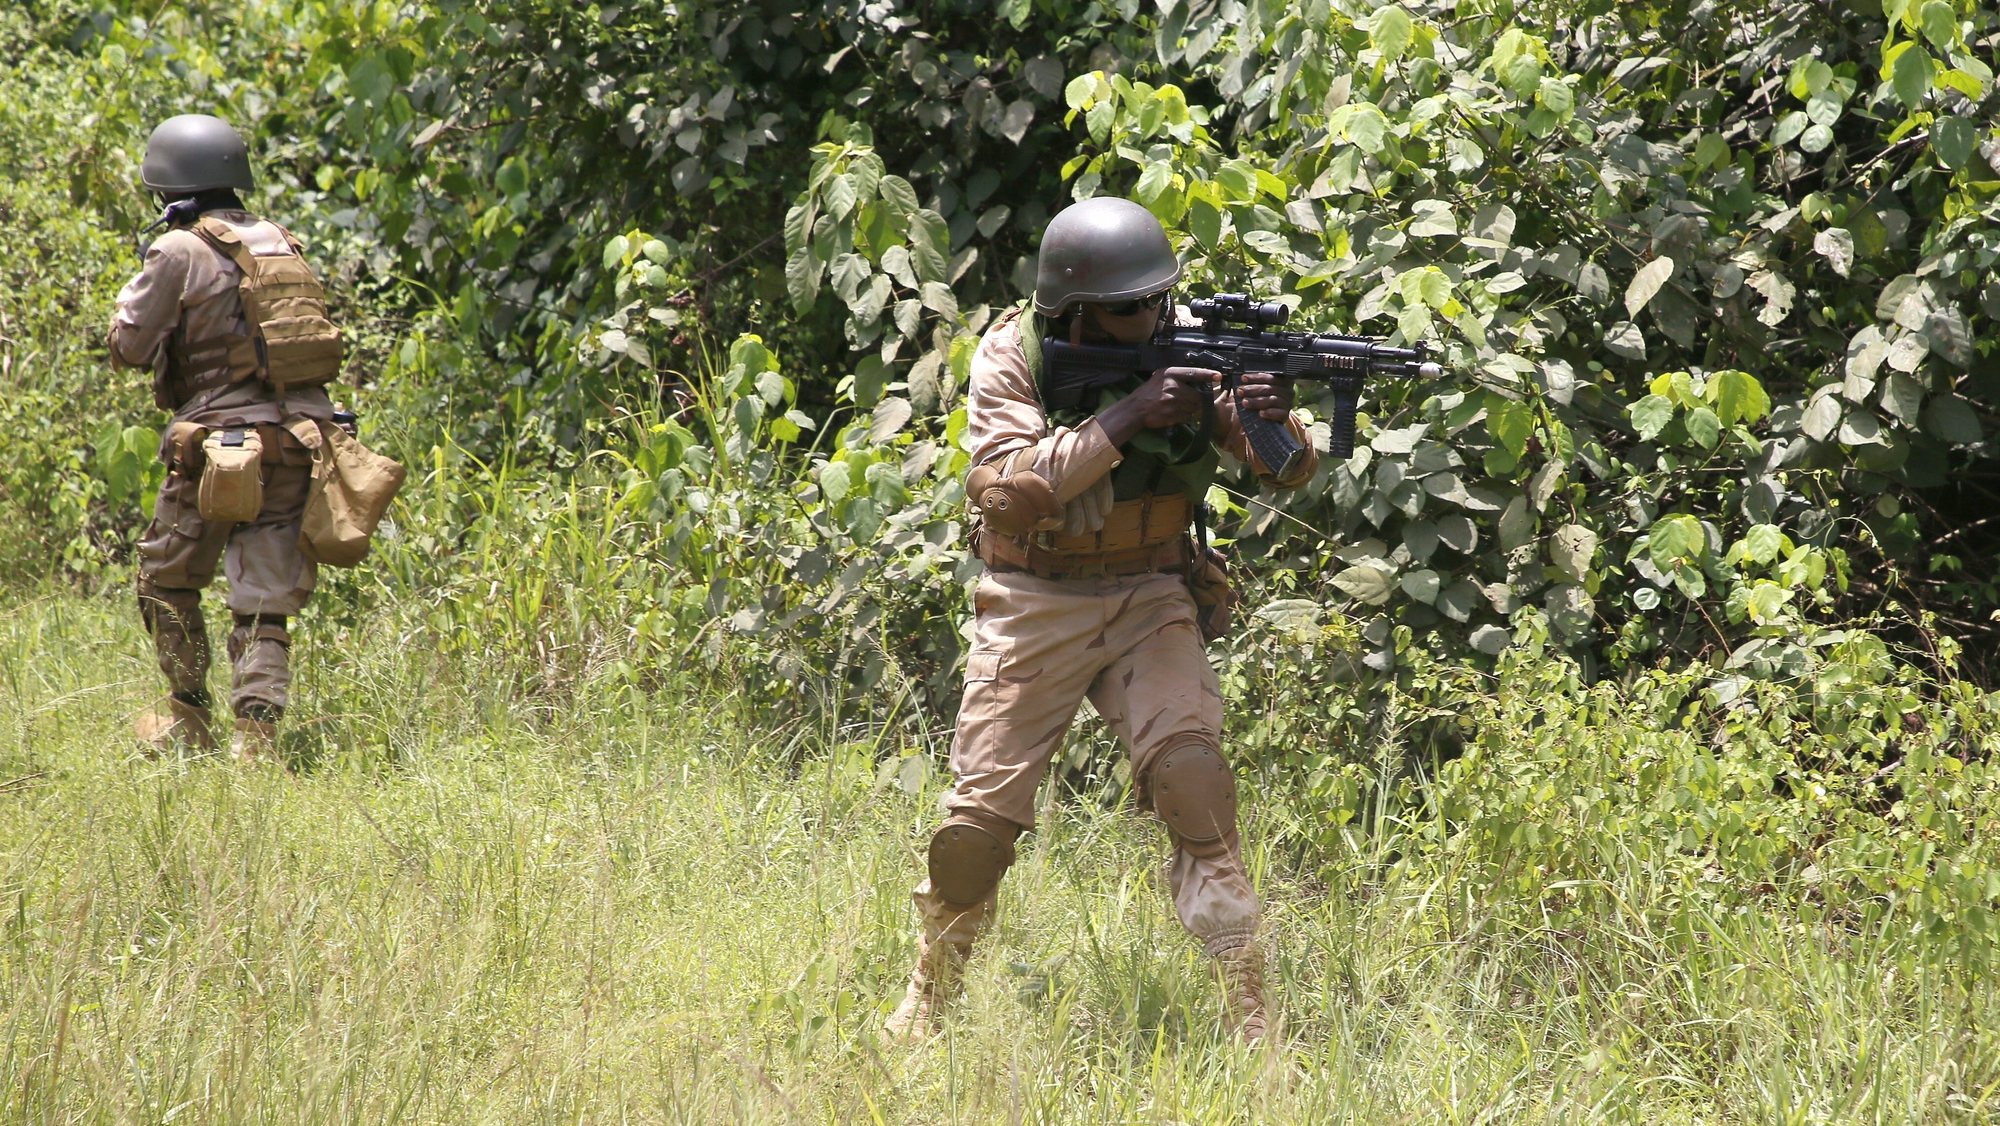 epa10515506 Nigeriens specials forces soldiers takes part in Flintlock 2023 which is a U.S. Africa Command annual special operations event, in Jacqueville, Ivory Coast, 11  March 2023. Flintlock is U.S. Africa Command&#039;s first and largest annual special operations exercise combining military and law enforcement to build the capabilities of African and international special operations forces. The exercise, which has been held since 2005, is conducted on the basis of mutual respect and collaboration to advance the common interests of regional stability. The host countries this year are Ghana and Ivory Coast, about 1300 soldiers from 30 countries are participating. Flintlock aims to build the capacity of key partner countries in the region to counter violent extremist groups, collaborate across borders and keep their people safe, while respecting human rights and building trust with civilian populations. The African countries participating this year are Burkina Faso, Cape Verde, Cameroon, Chad, CÃ´te d&#039;Ivoire, Ghana, Libya, Mauritania, Niger, Nigeria, Senegal, South Africa, Togo, Morocco and Tunisia. Other participants are Austria, Belgium, Brazil, Canada, Czech Republic, Denmark, France, Germany, Italy, Netherlands, Poland, Spain, UK United and the United States, according to U.S. Africa Command&#039;s official website.  EPA/LEGNAN KOULA